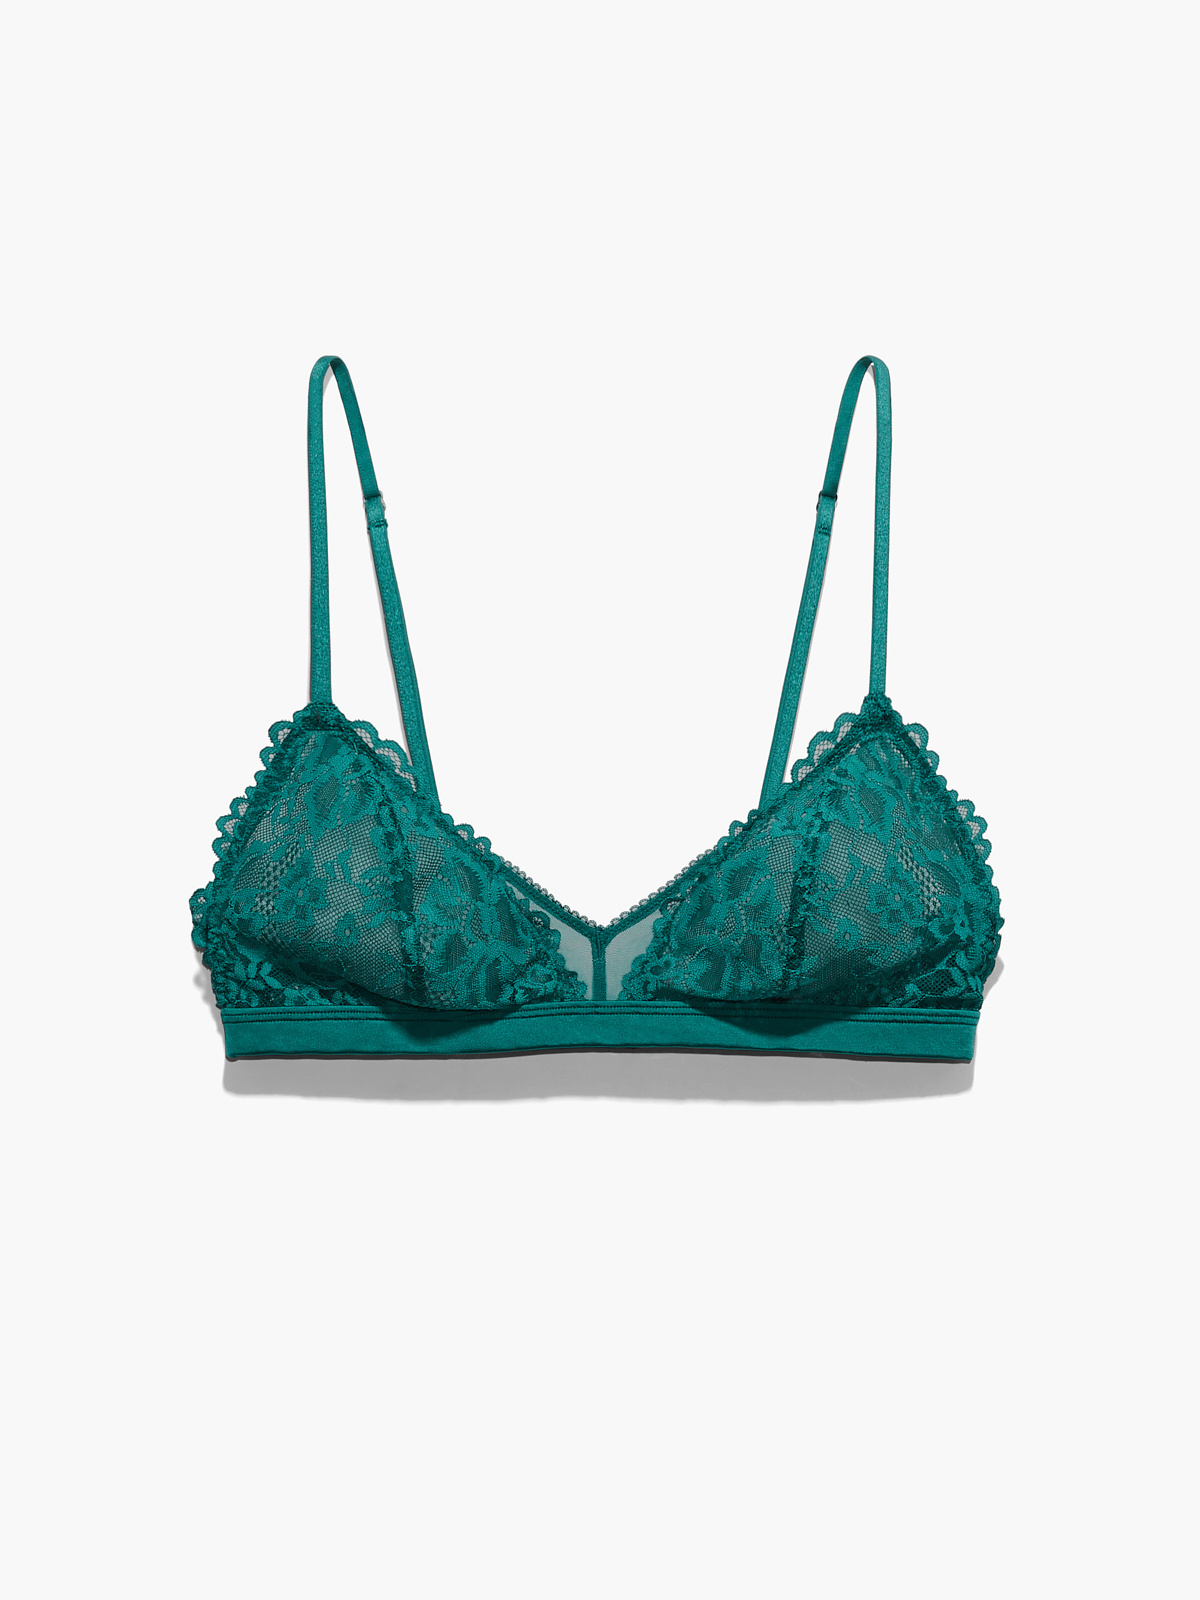 https://cdn.savagex.com/media/images/products/BB2147015-3820/FLORAL-LACE-AND-MESH-BRALETTE-BB2147015-3820-LAYDOWN-1200x1600.jpg